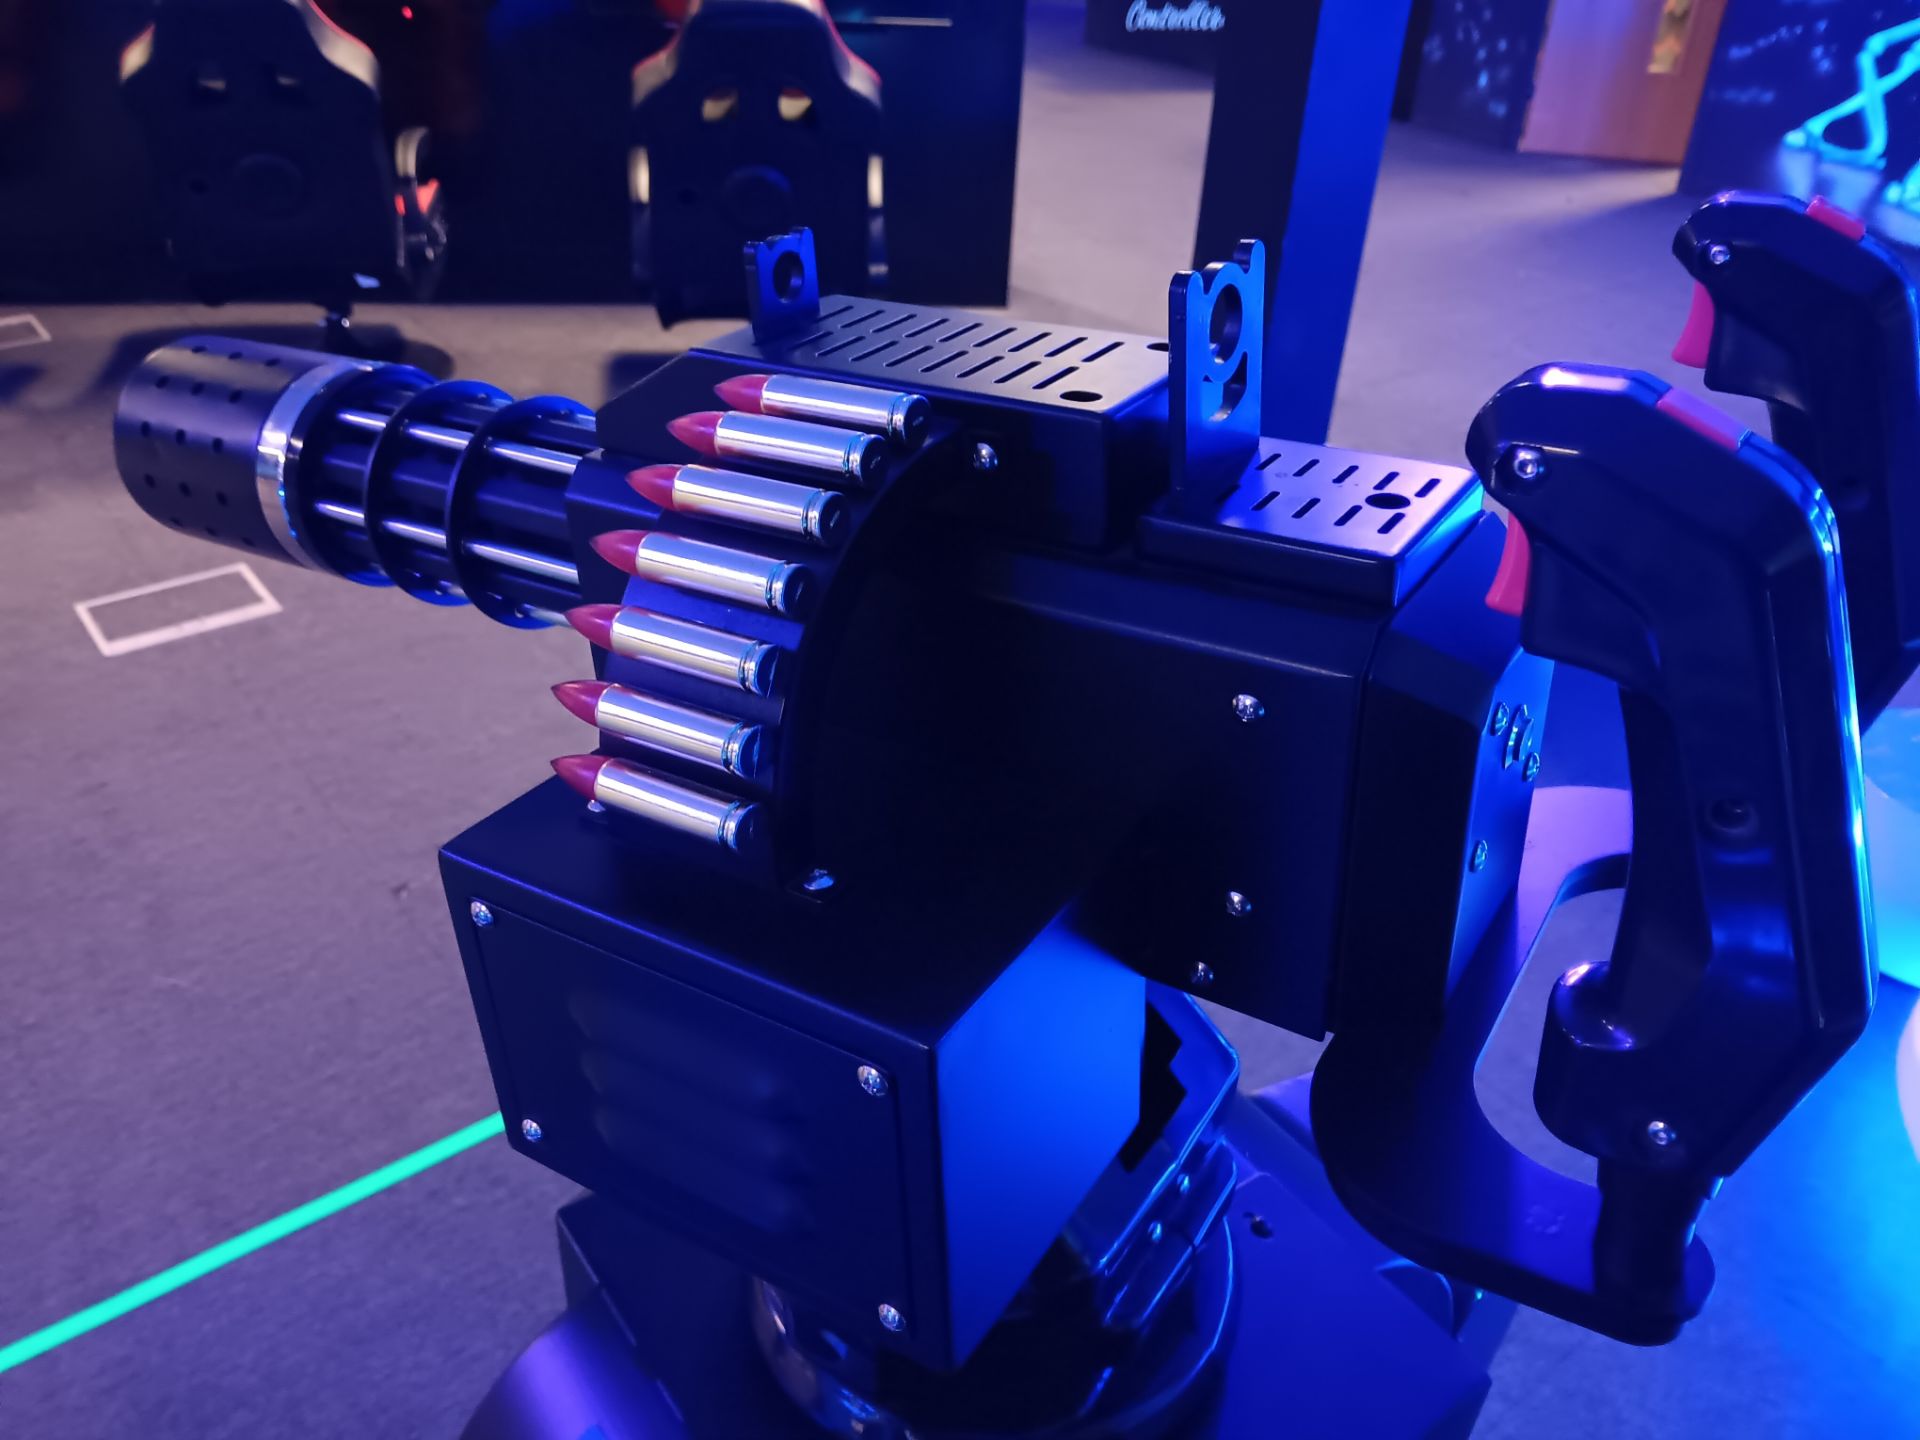 Movie Power VR Gatling Gun Shooting Simulator – Cost New £9,000 - Buyer to Disconnect & remove - Image 5 of 6